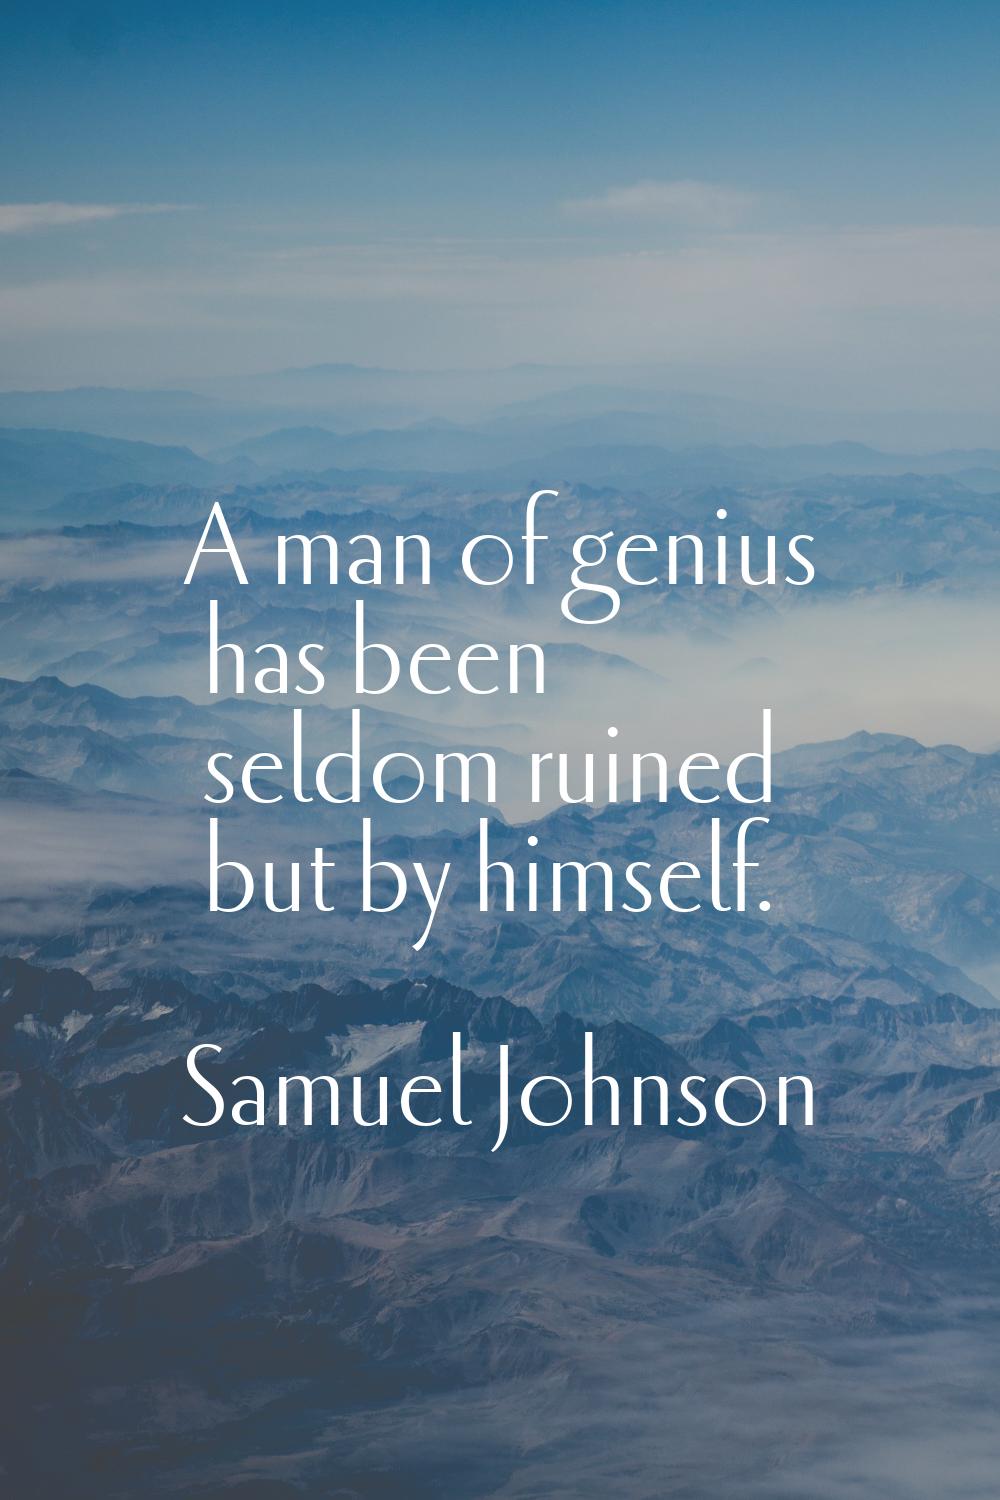 A man of genius has been seldom ruined but by himself.